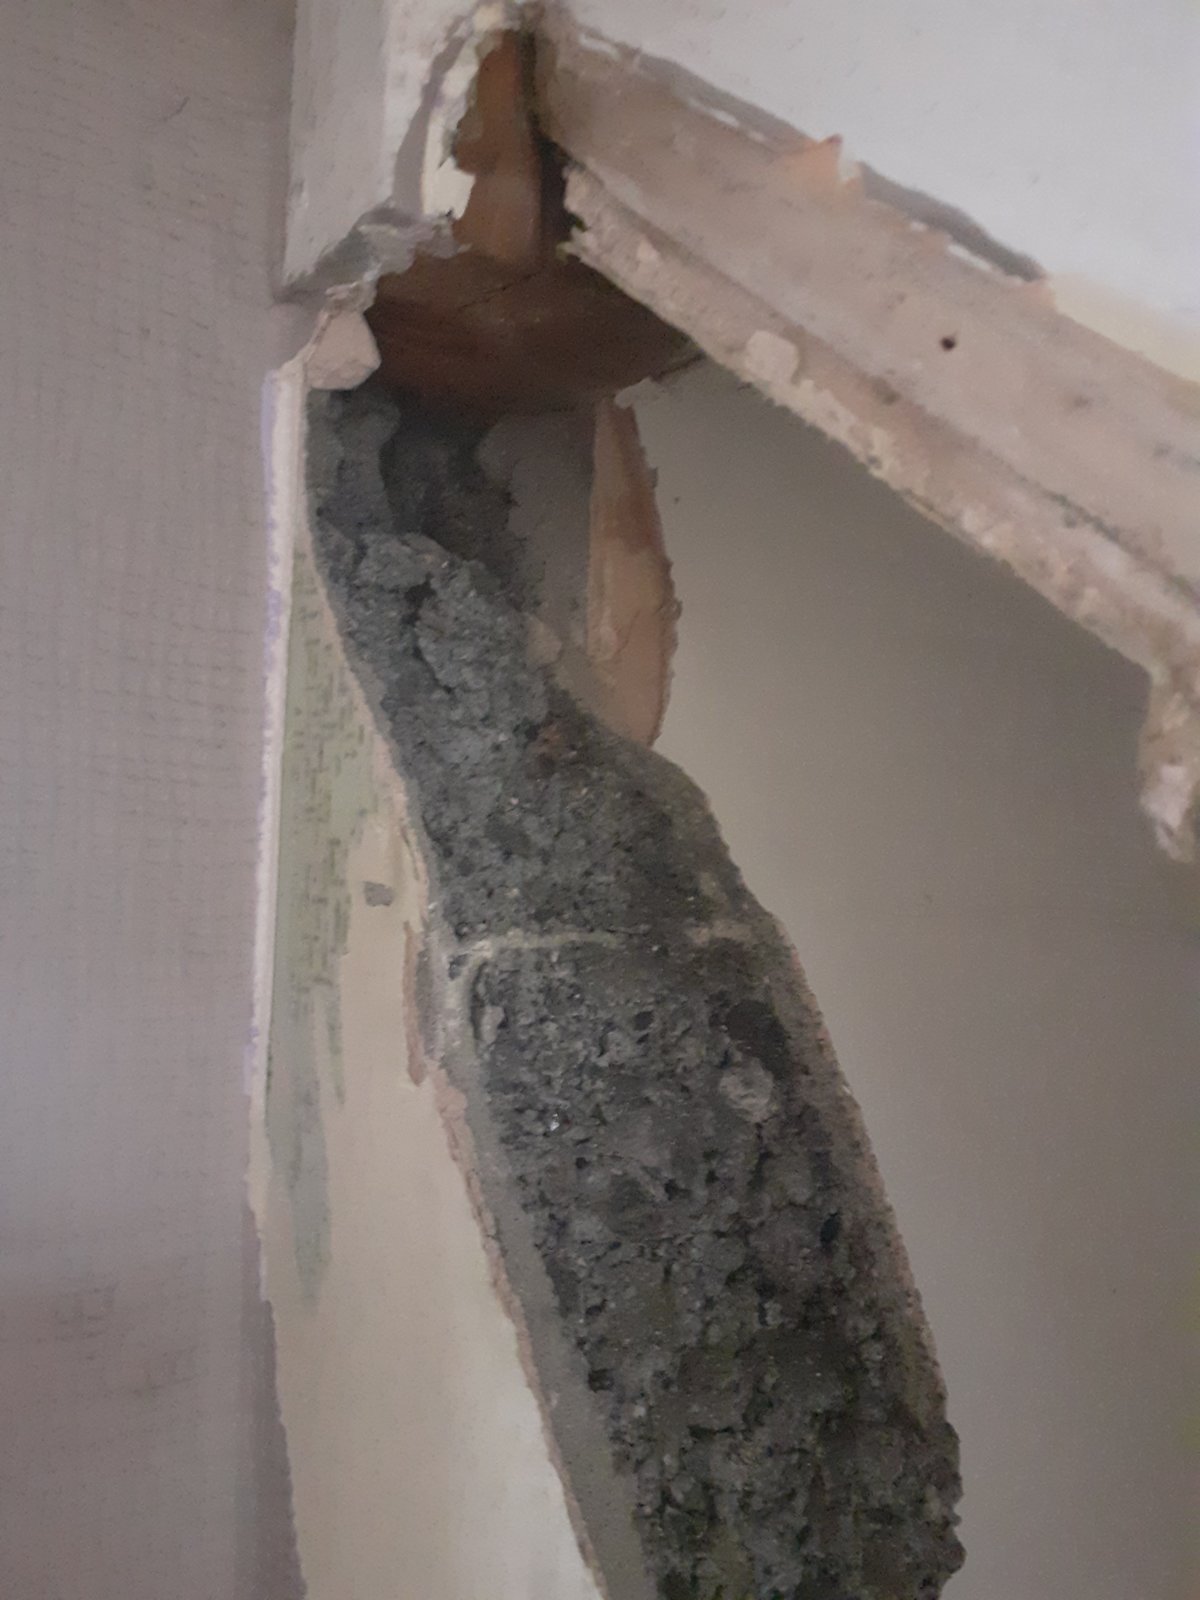 Remove wall under stairs. | DIYnot Forums